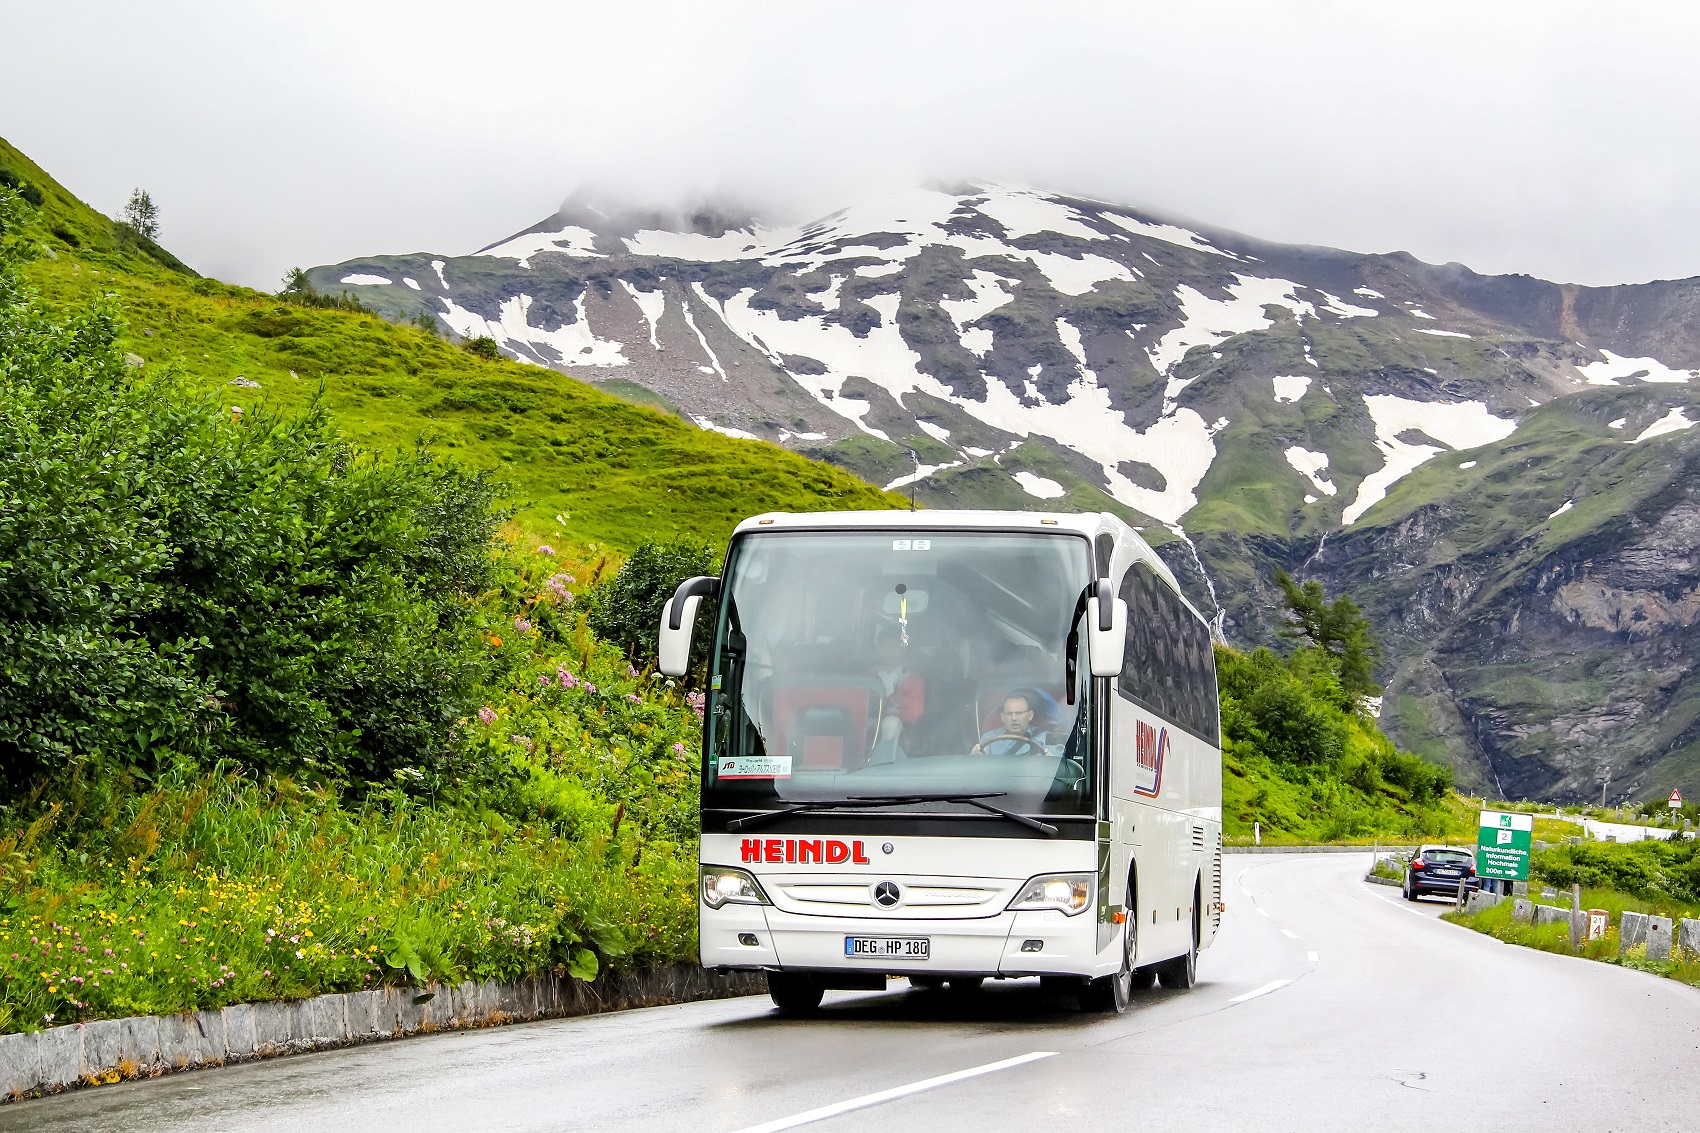 Coach drivers hours reform coming to the EU in 2024